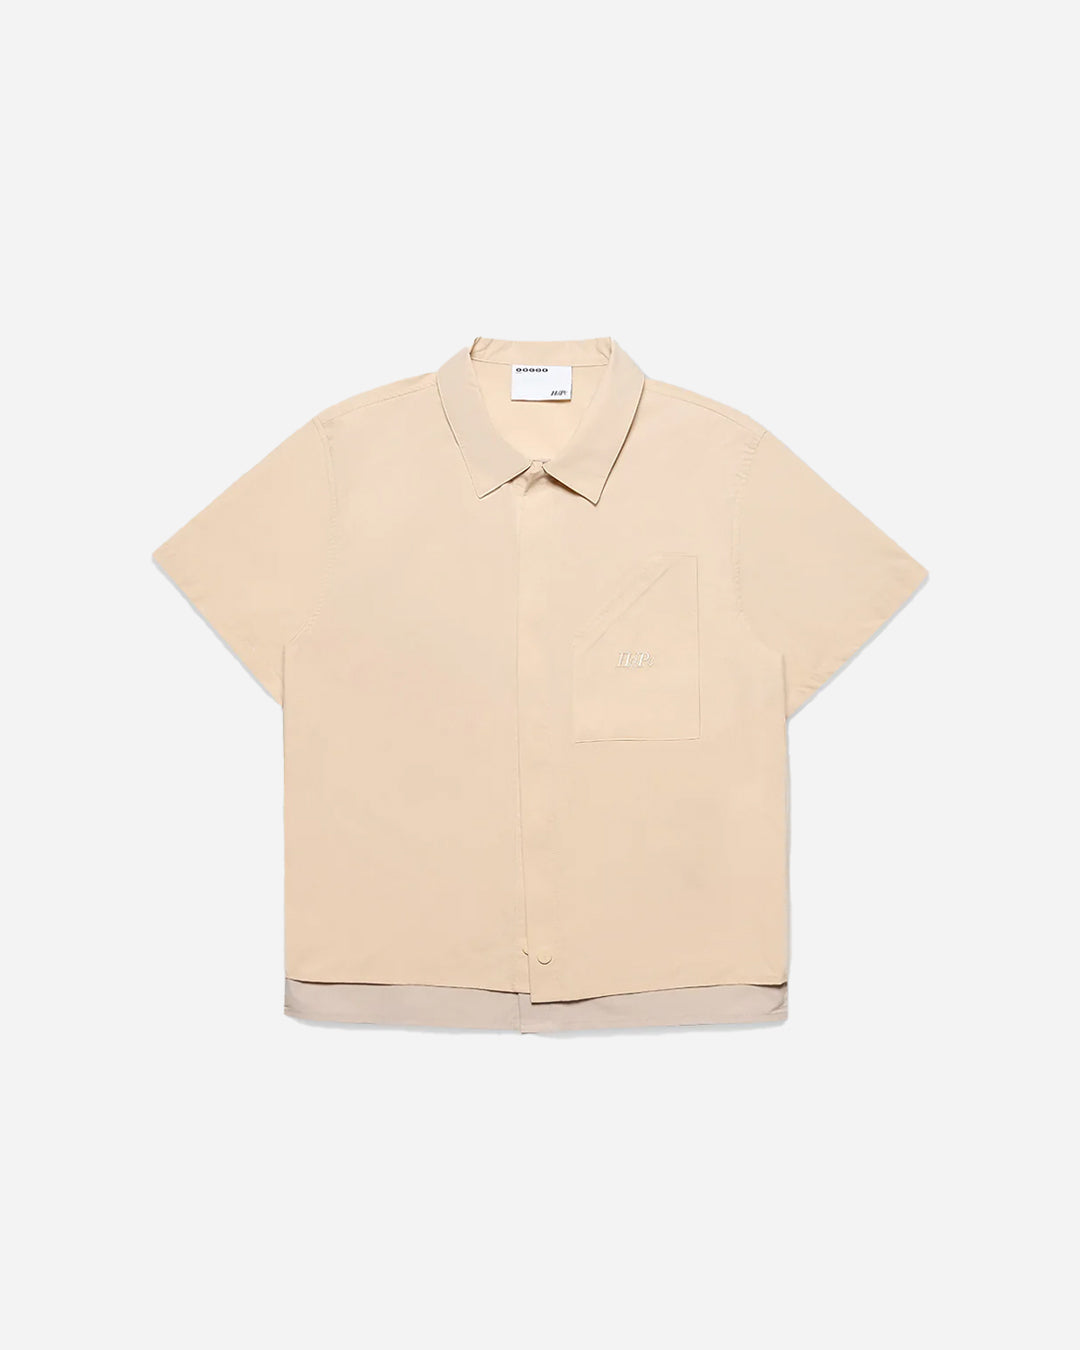 RIPSTOP DOUBLE LAYERED SHIRT